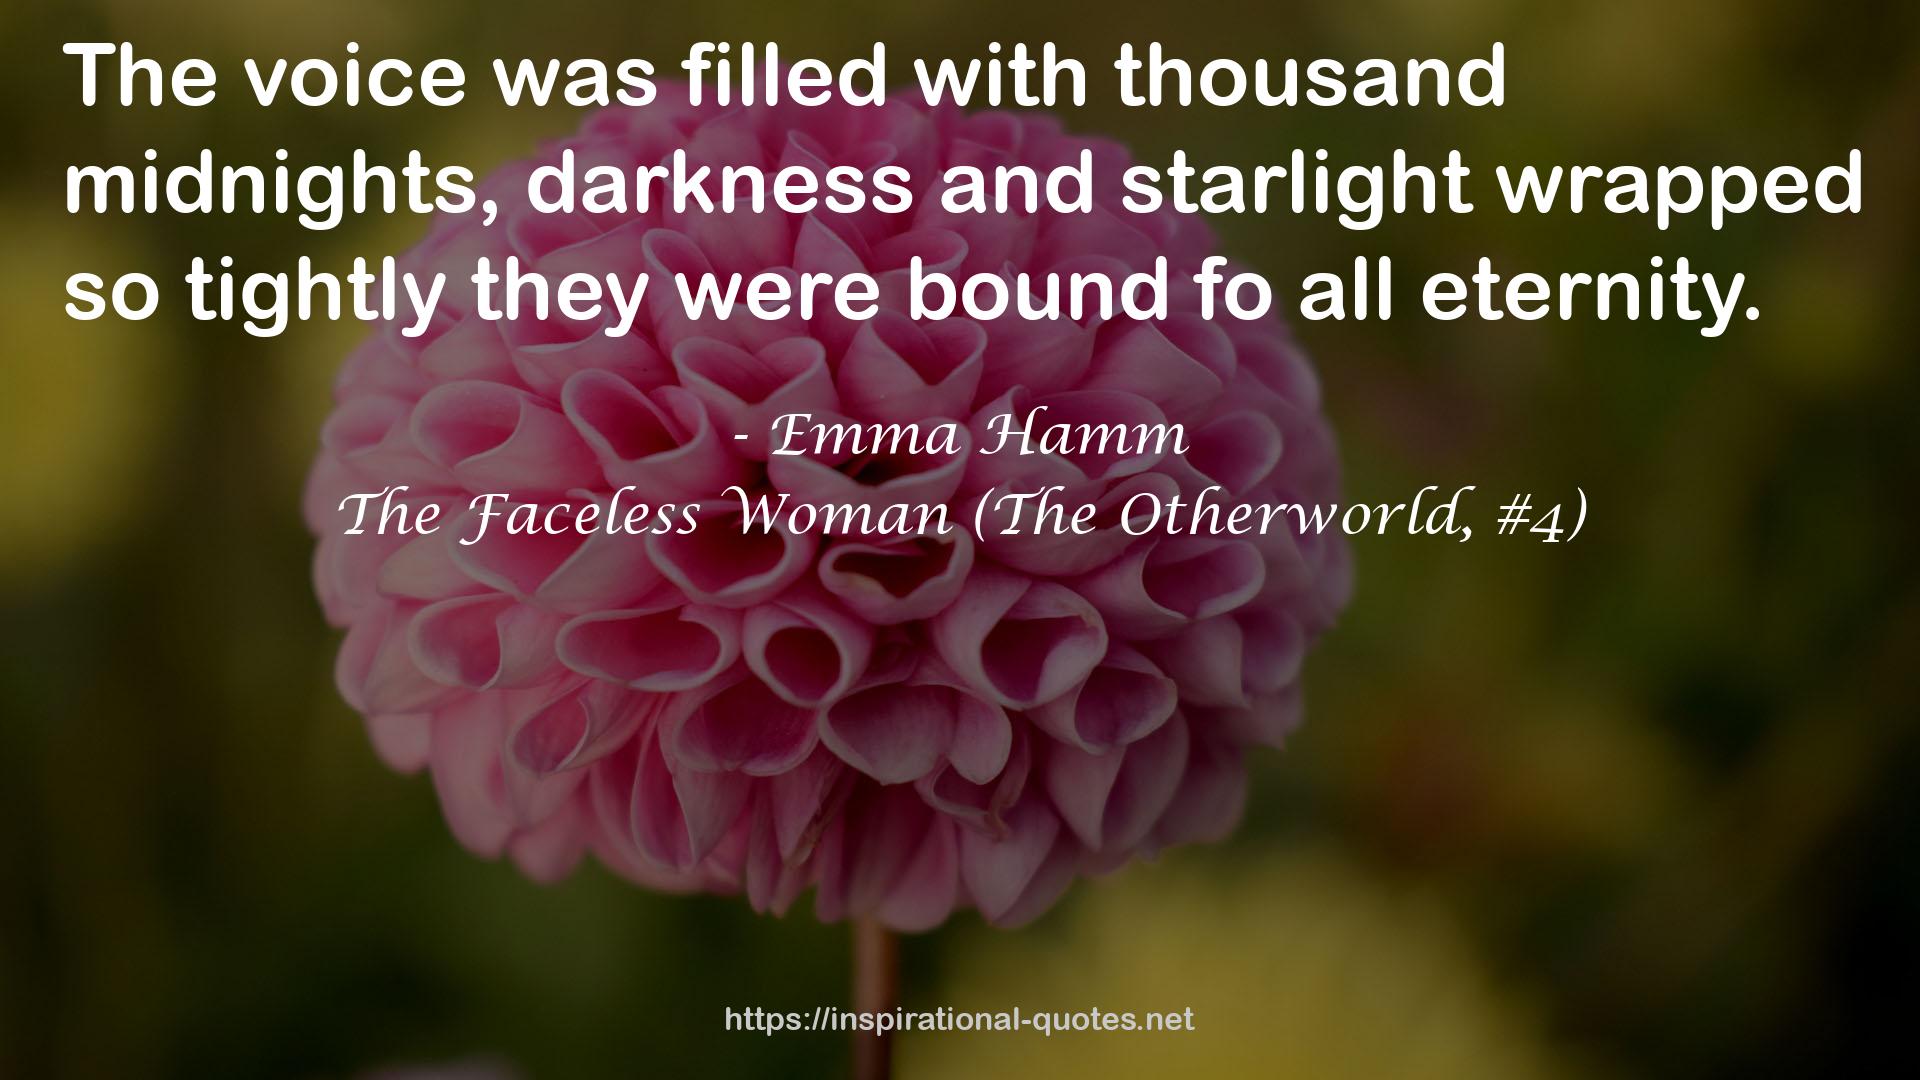 The Faceless Woman (The Otherworld, #4) QUOTES